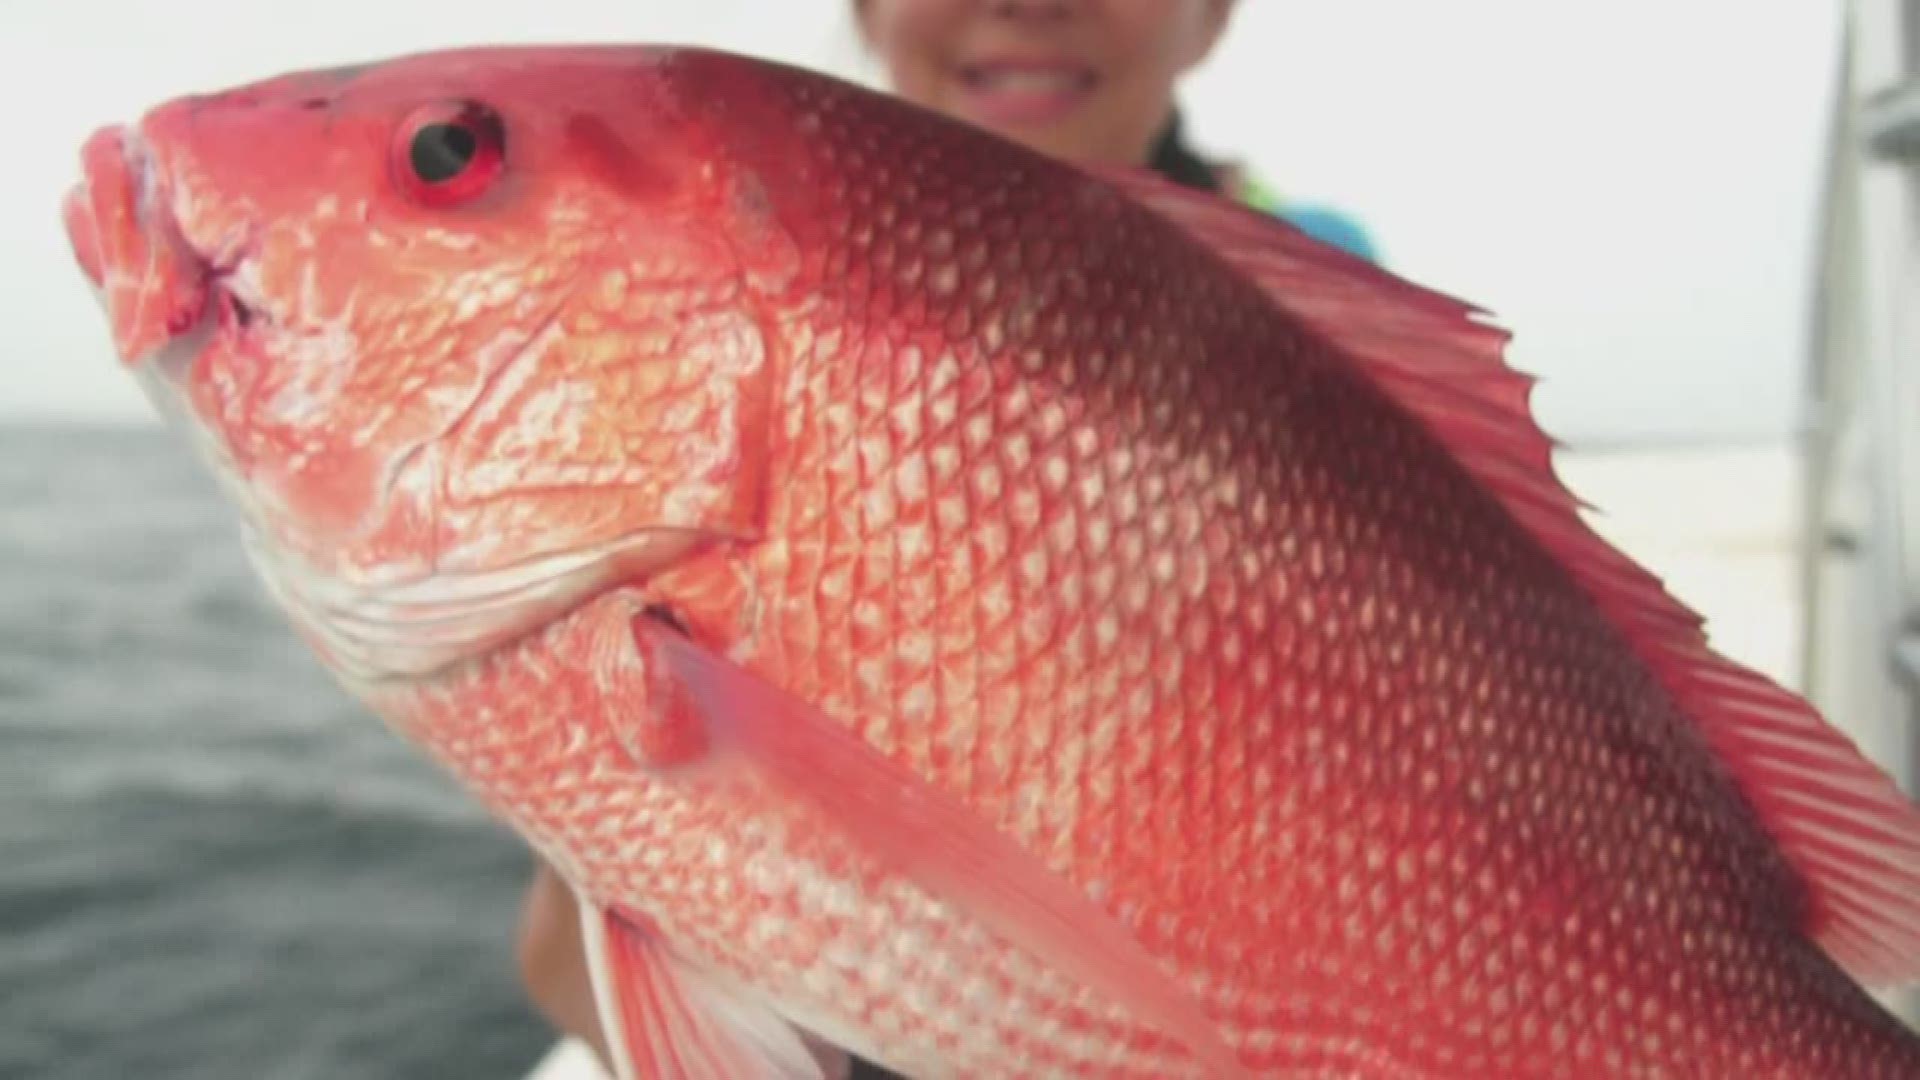 Don Dubuc has the info on what you need to do to catch red snapper legally this Memorial Day weekend, as the season opens.